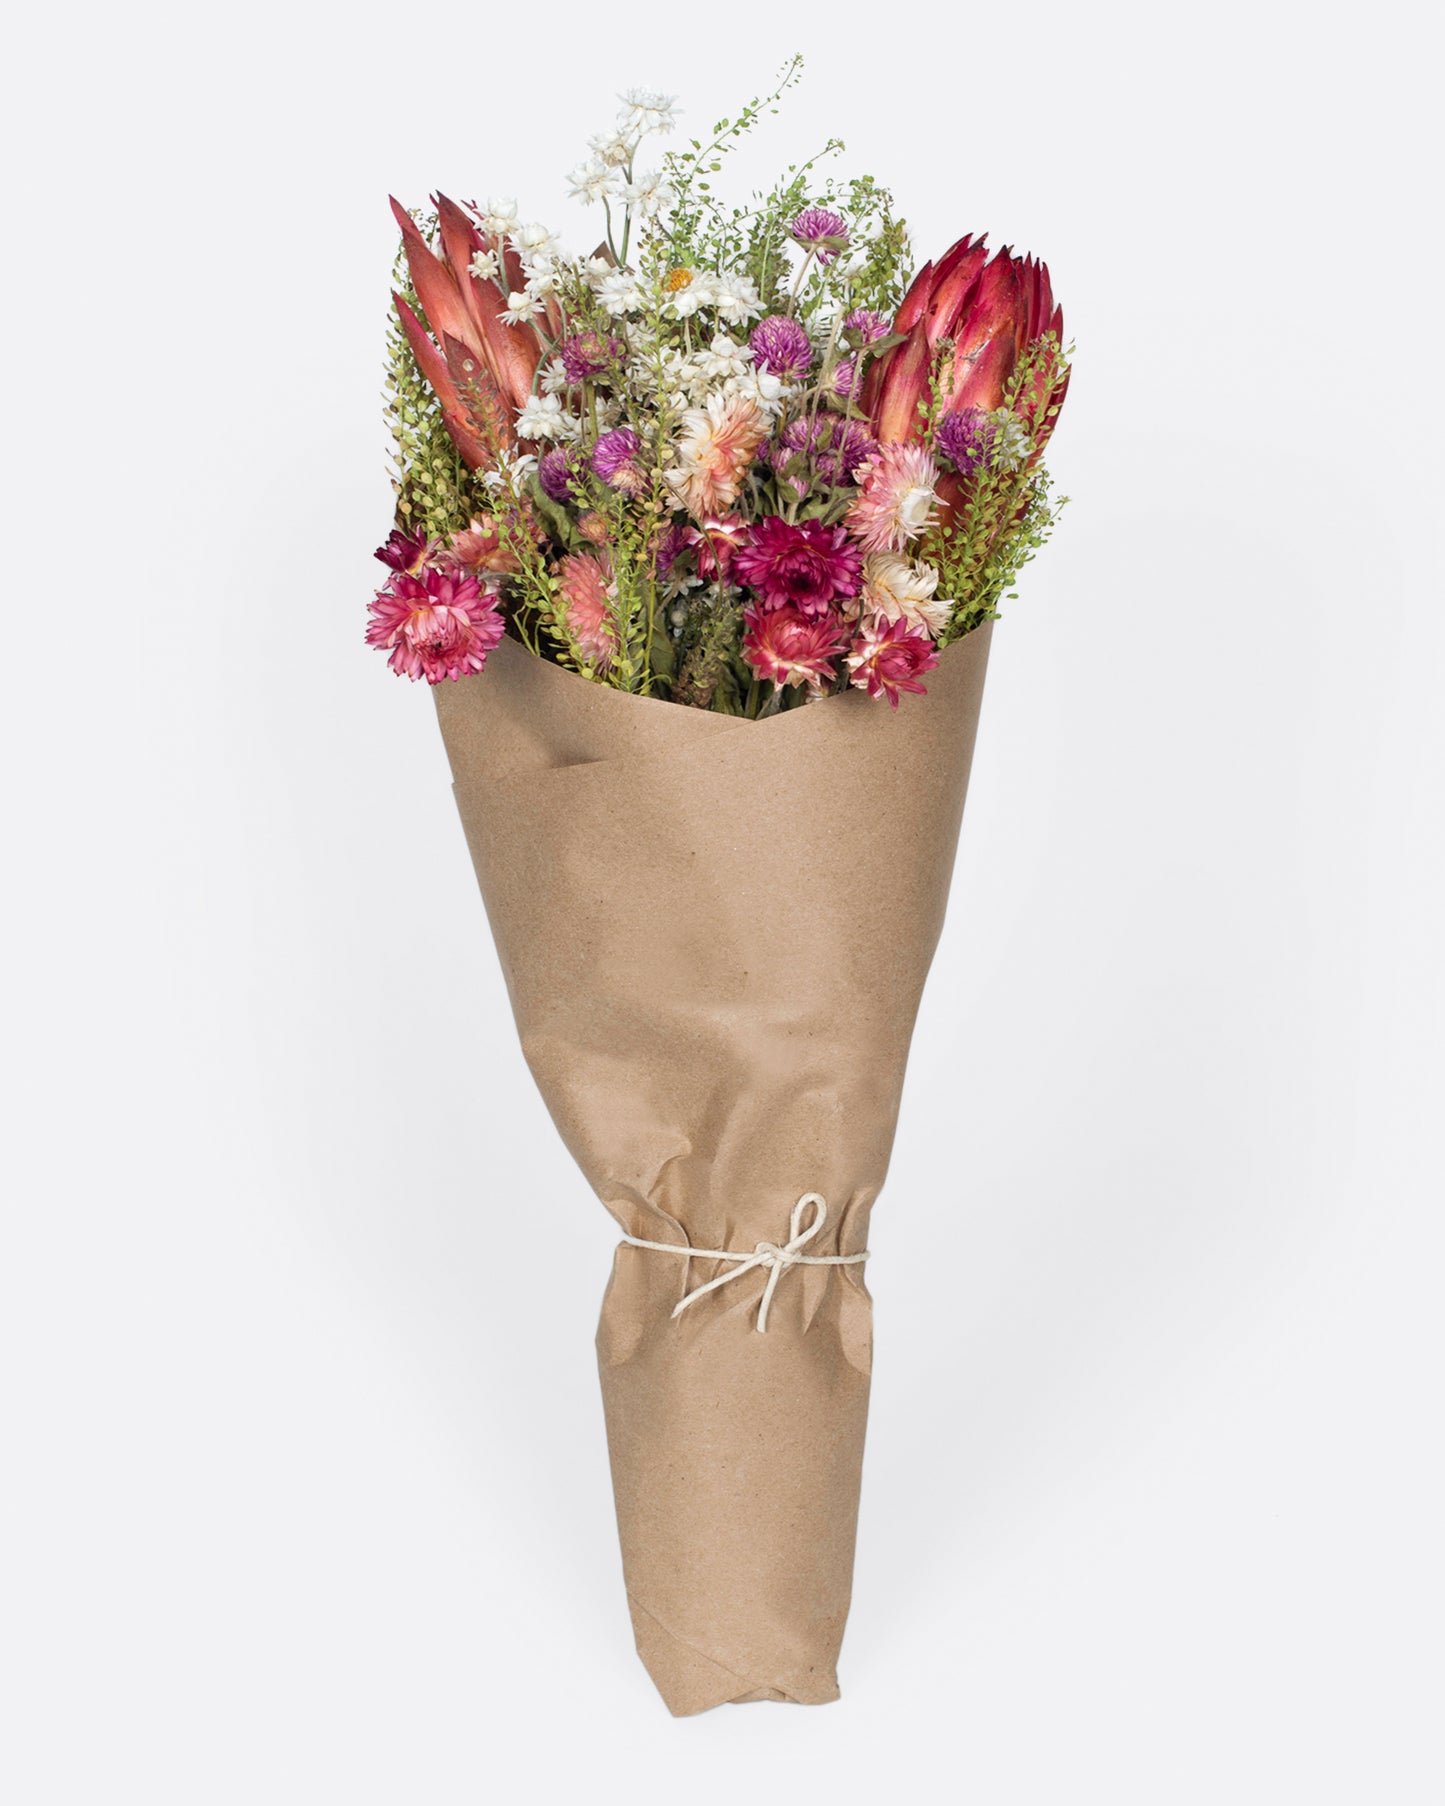 A dried flower bouquet in assorted shades of pink, white, and red.